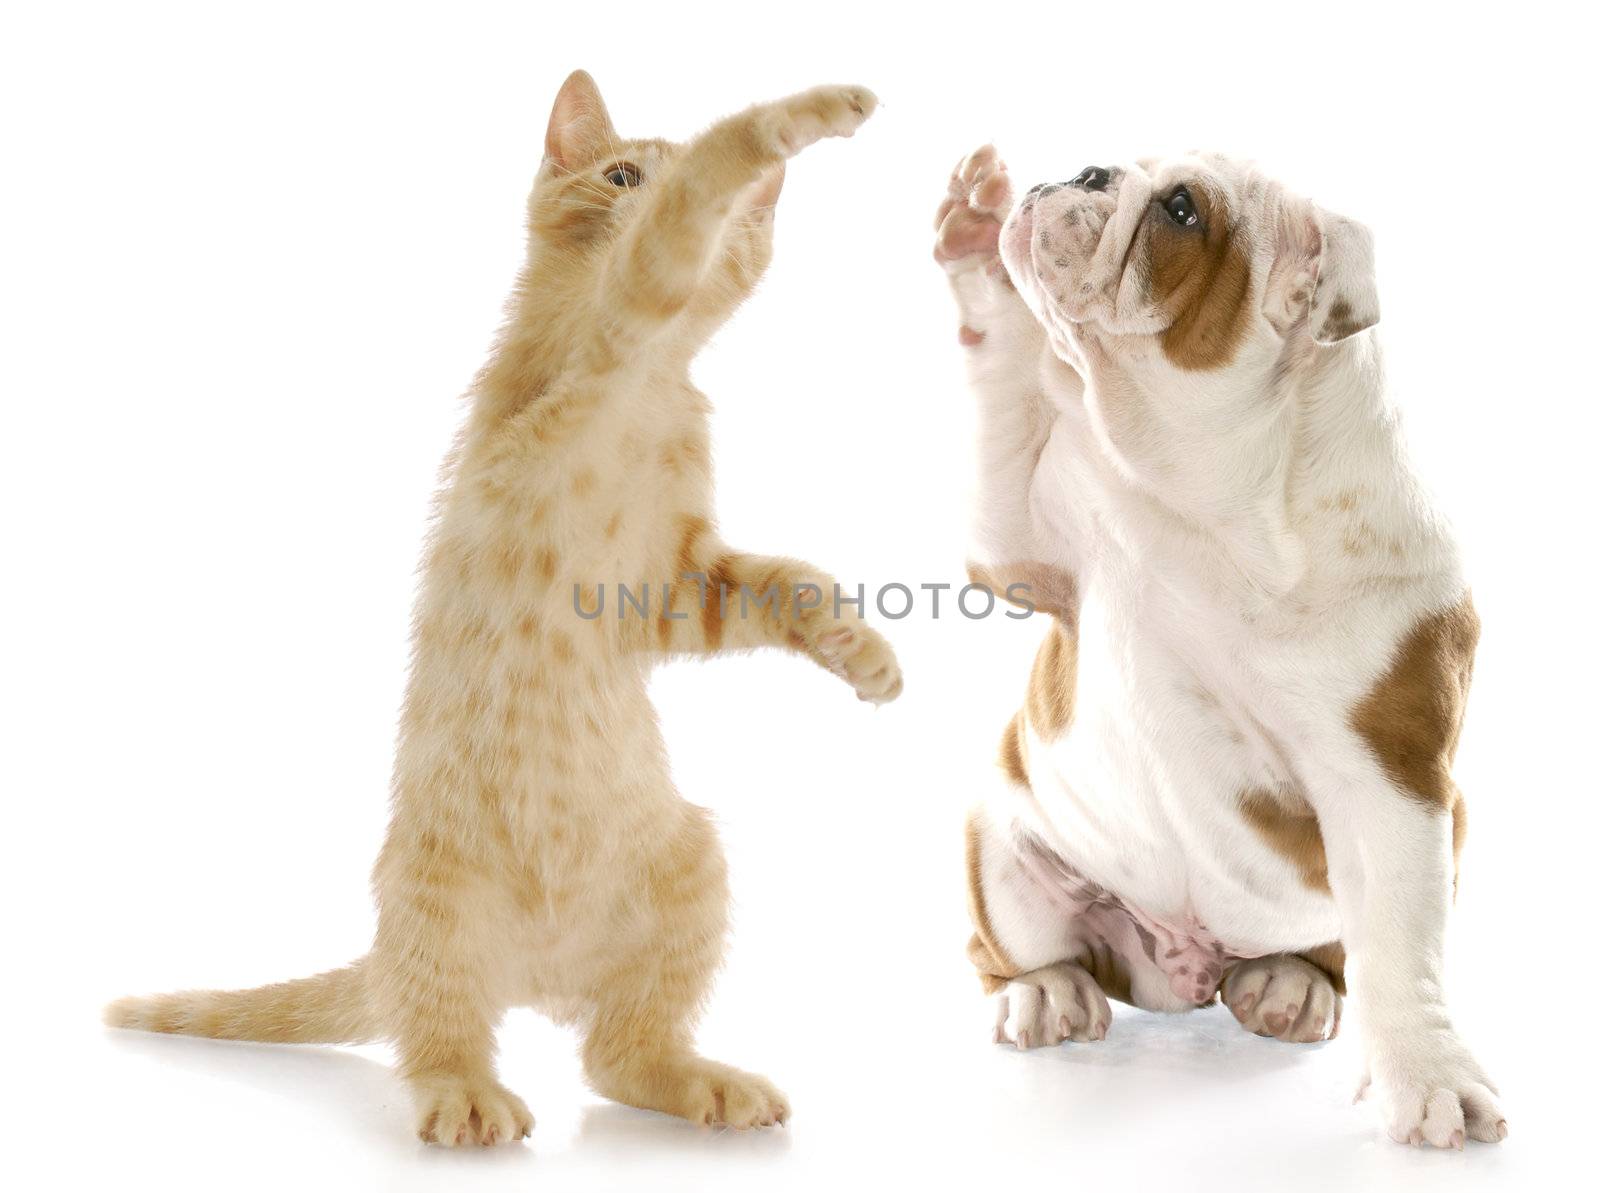 kitten standing up giving high five to english bulldog puppy with reflection on white background